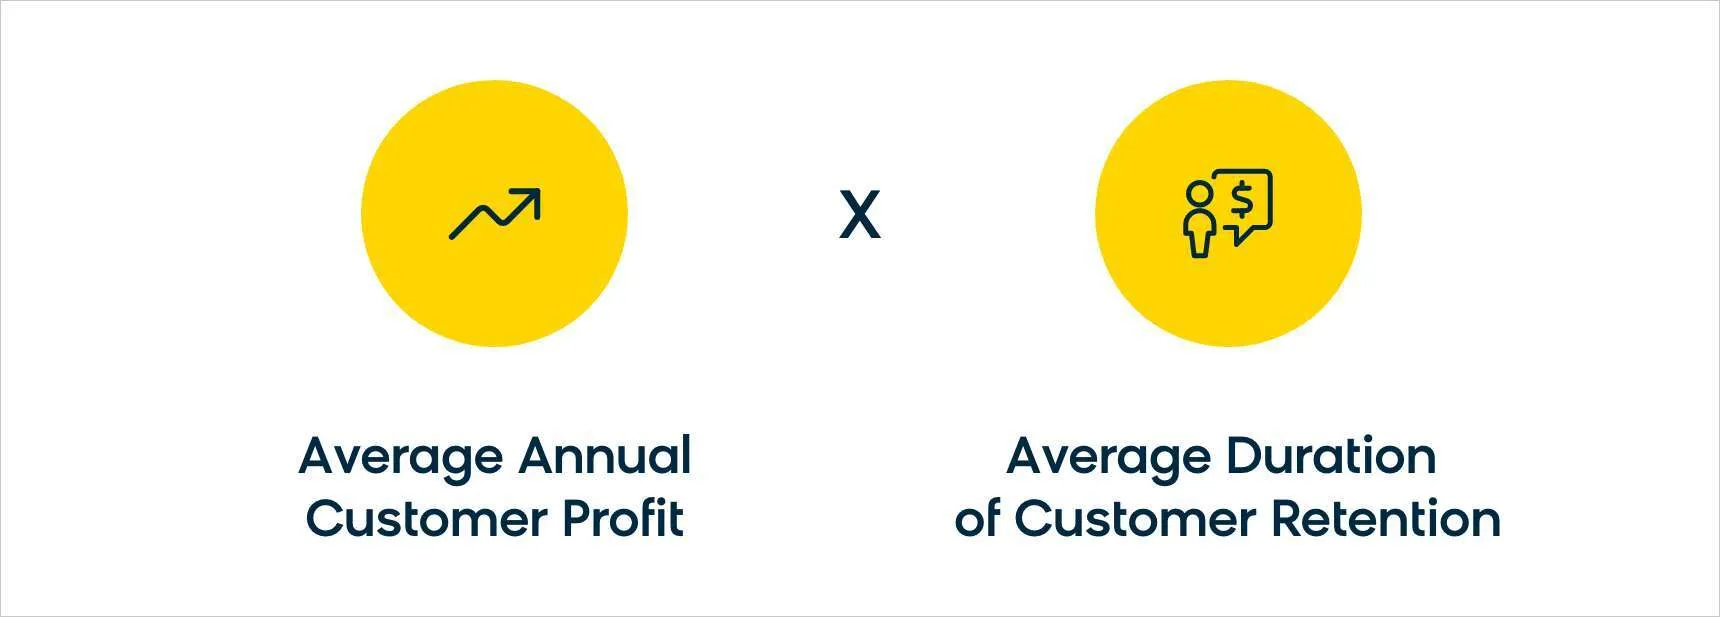 Average annual customer profit multiplied by average duration of customer retention